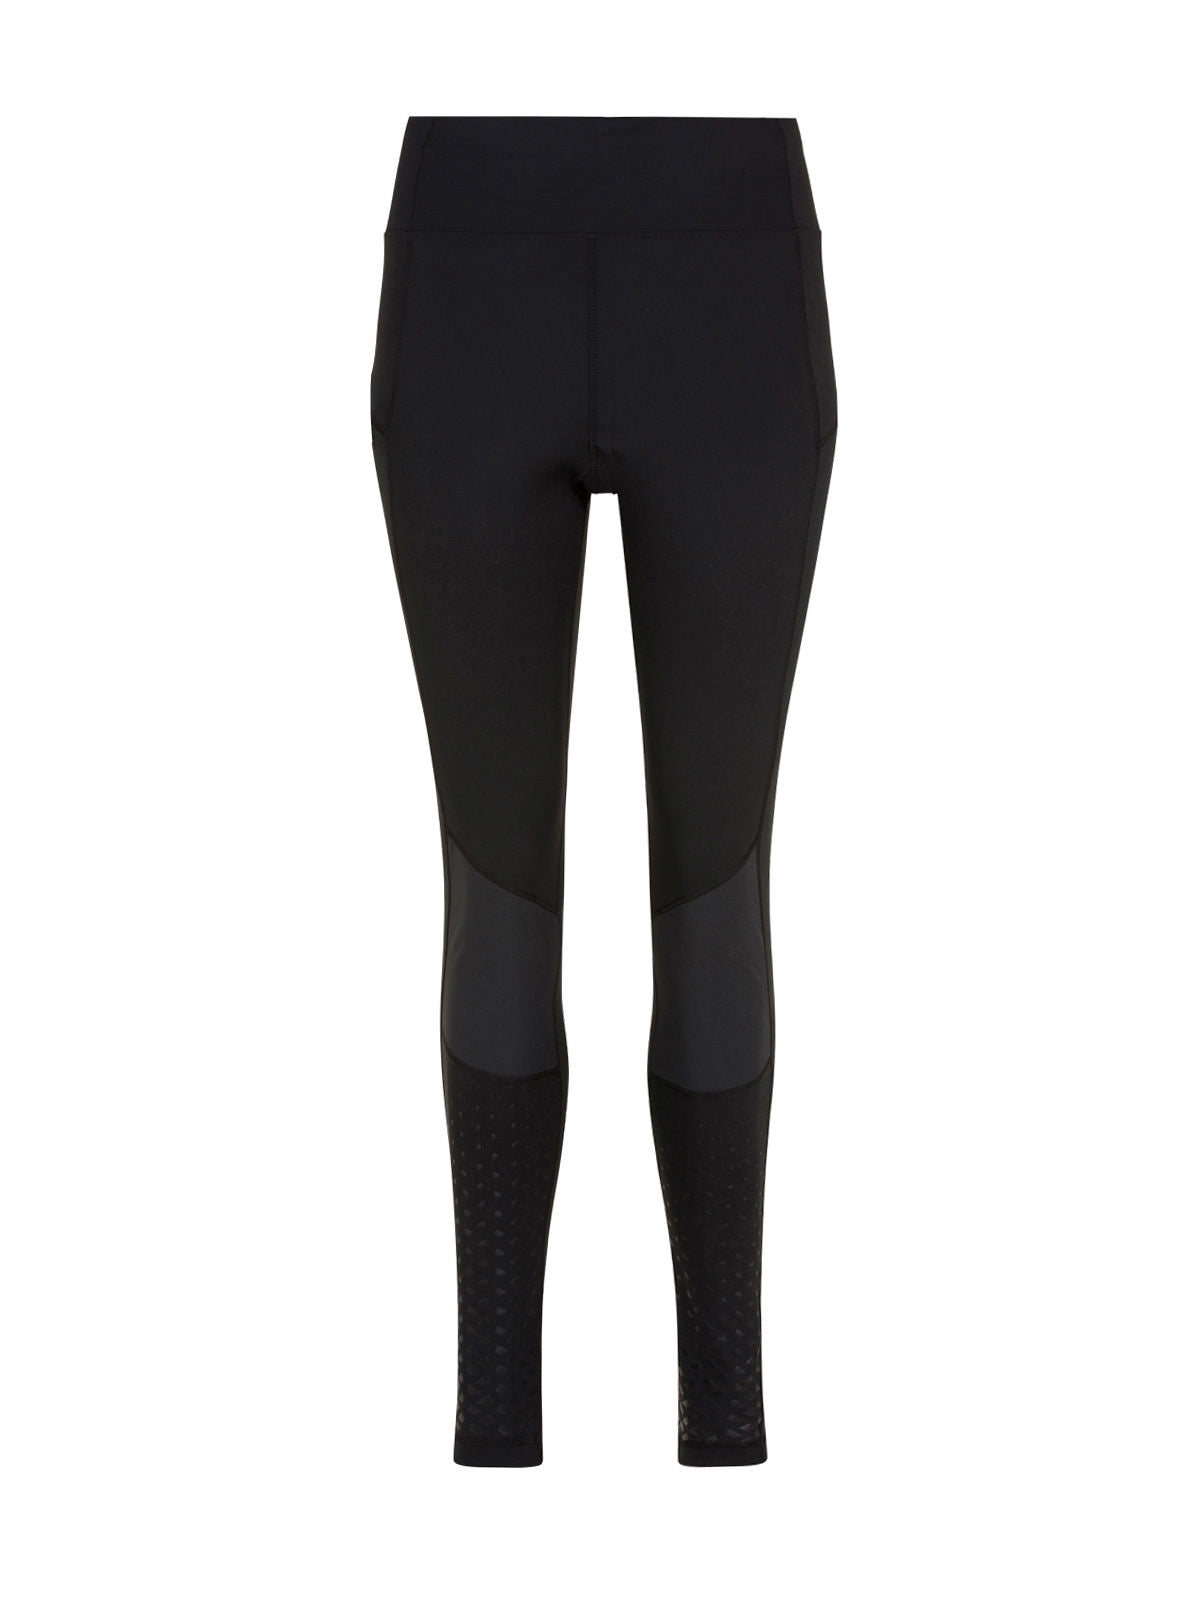 WOMEN'S LELYUR TREKKING TIGHTS - 毅成戶外用品RC Outfitters